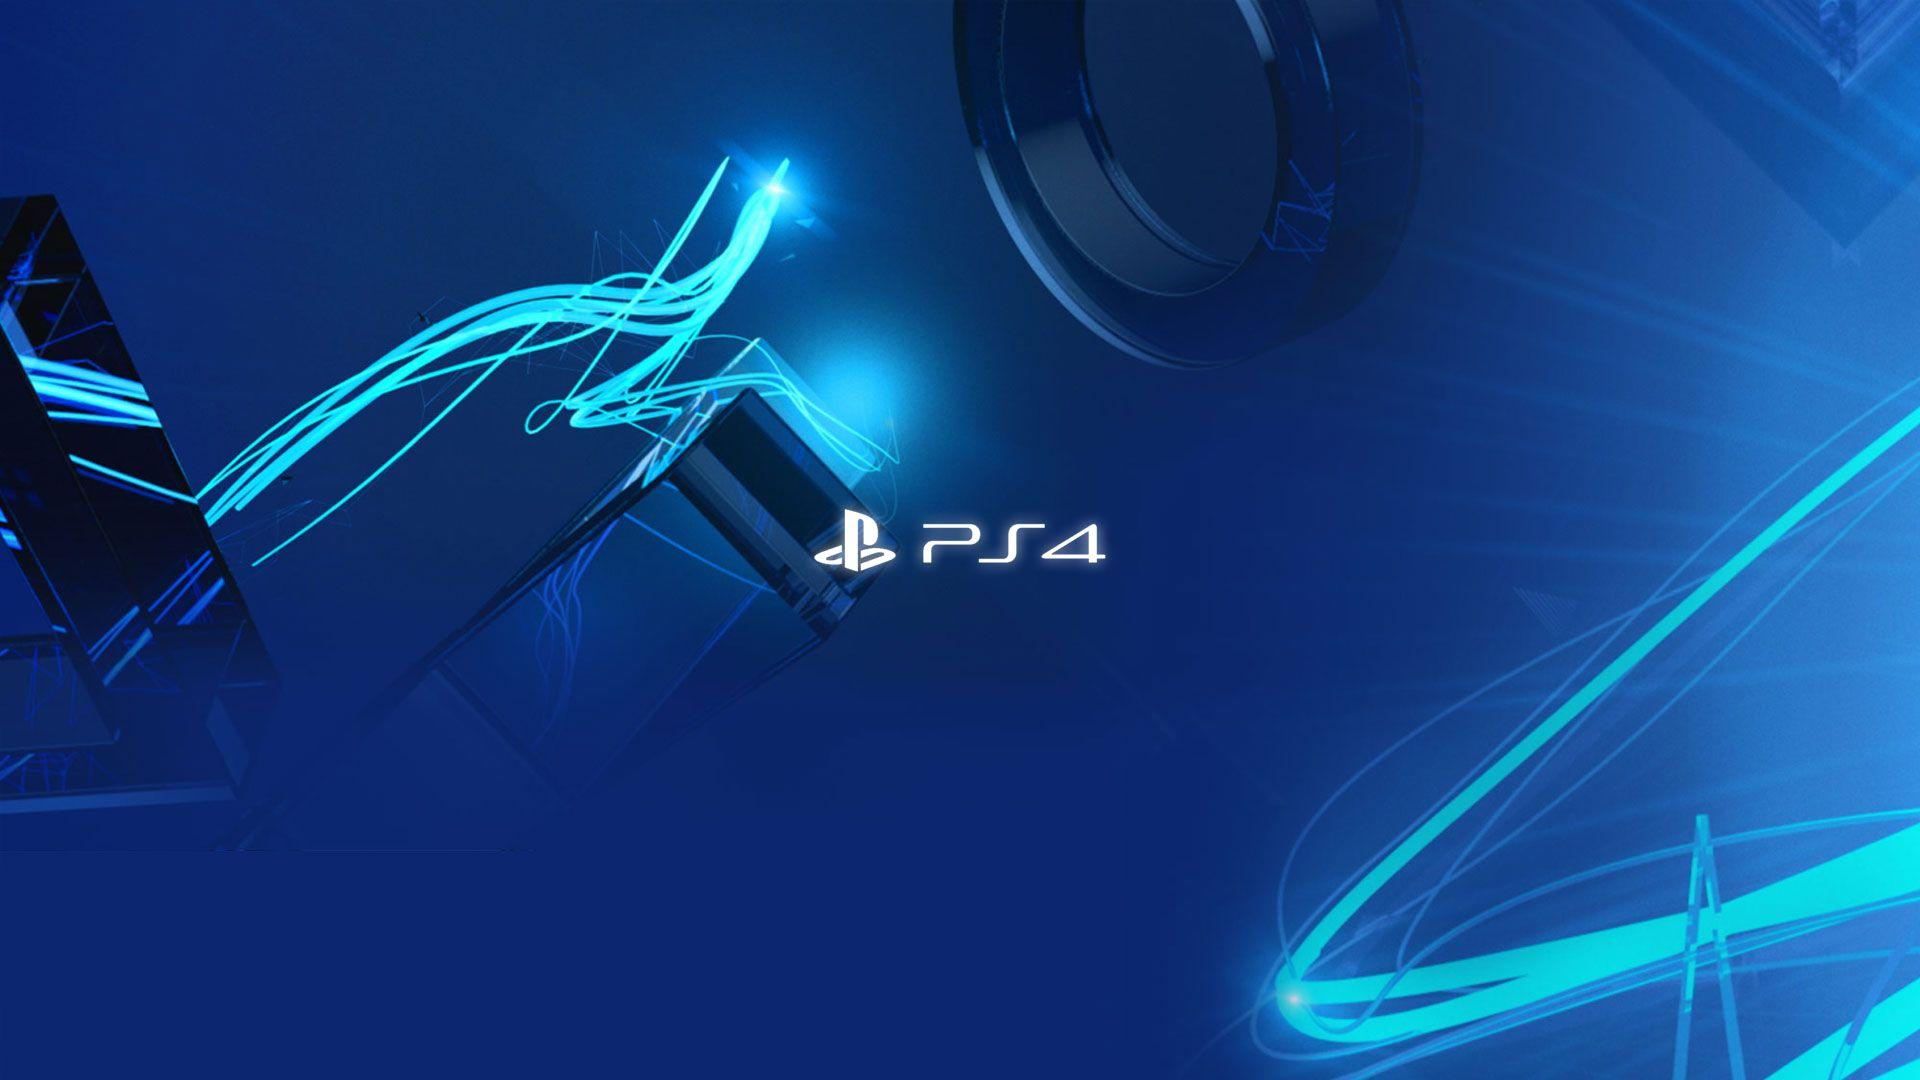 Playstation 4 Logo Wallpapers Top Free Playstation 4 Logo Backgrounds Wallpaperaccess